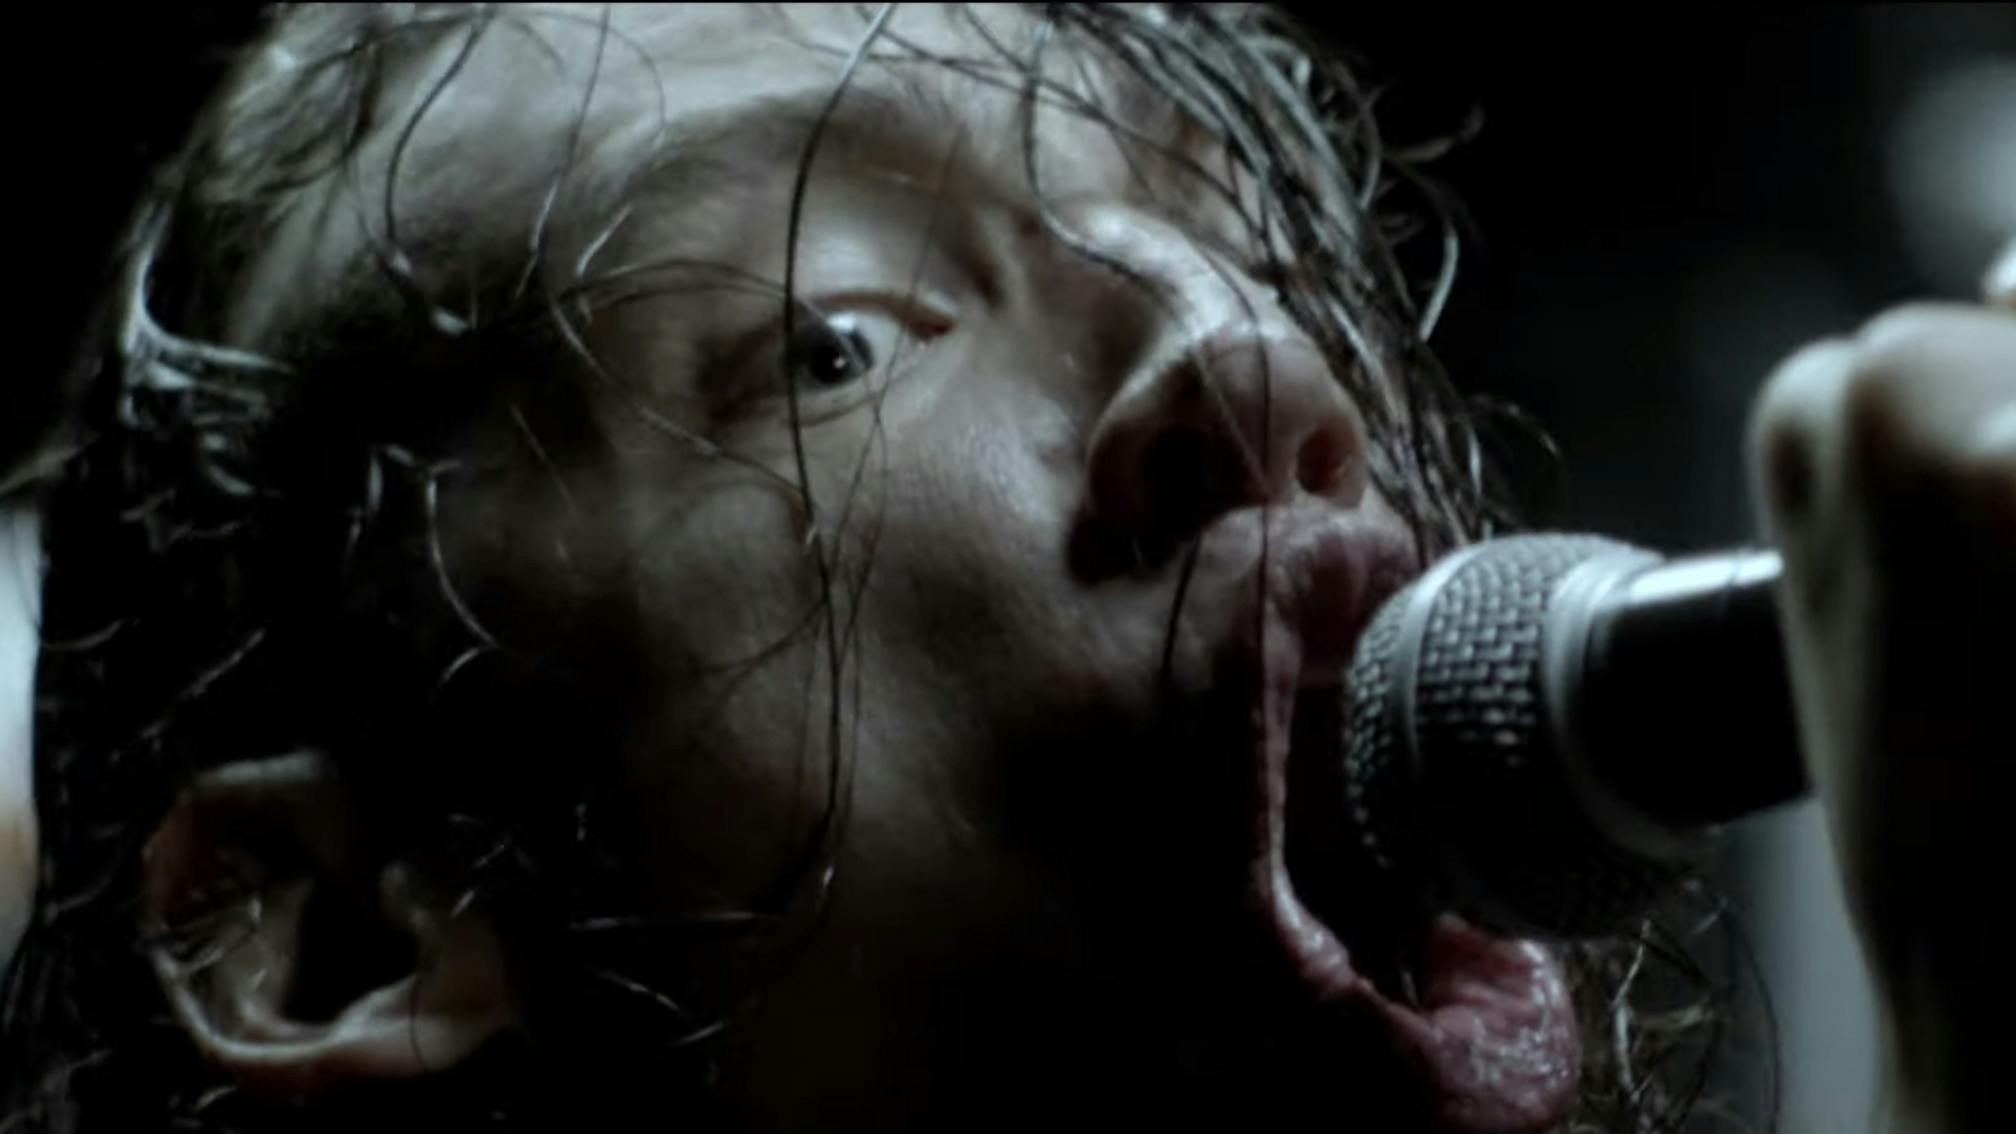 Code Orange Unleash New Song And Video, Swallowing The Rabbit Whole